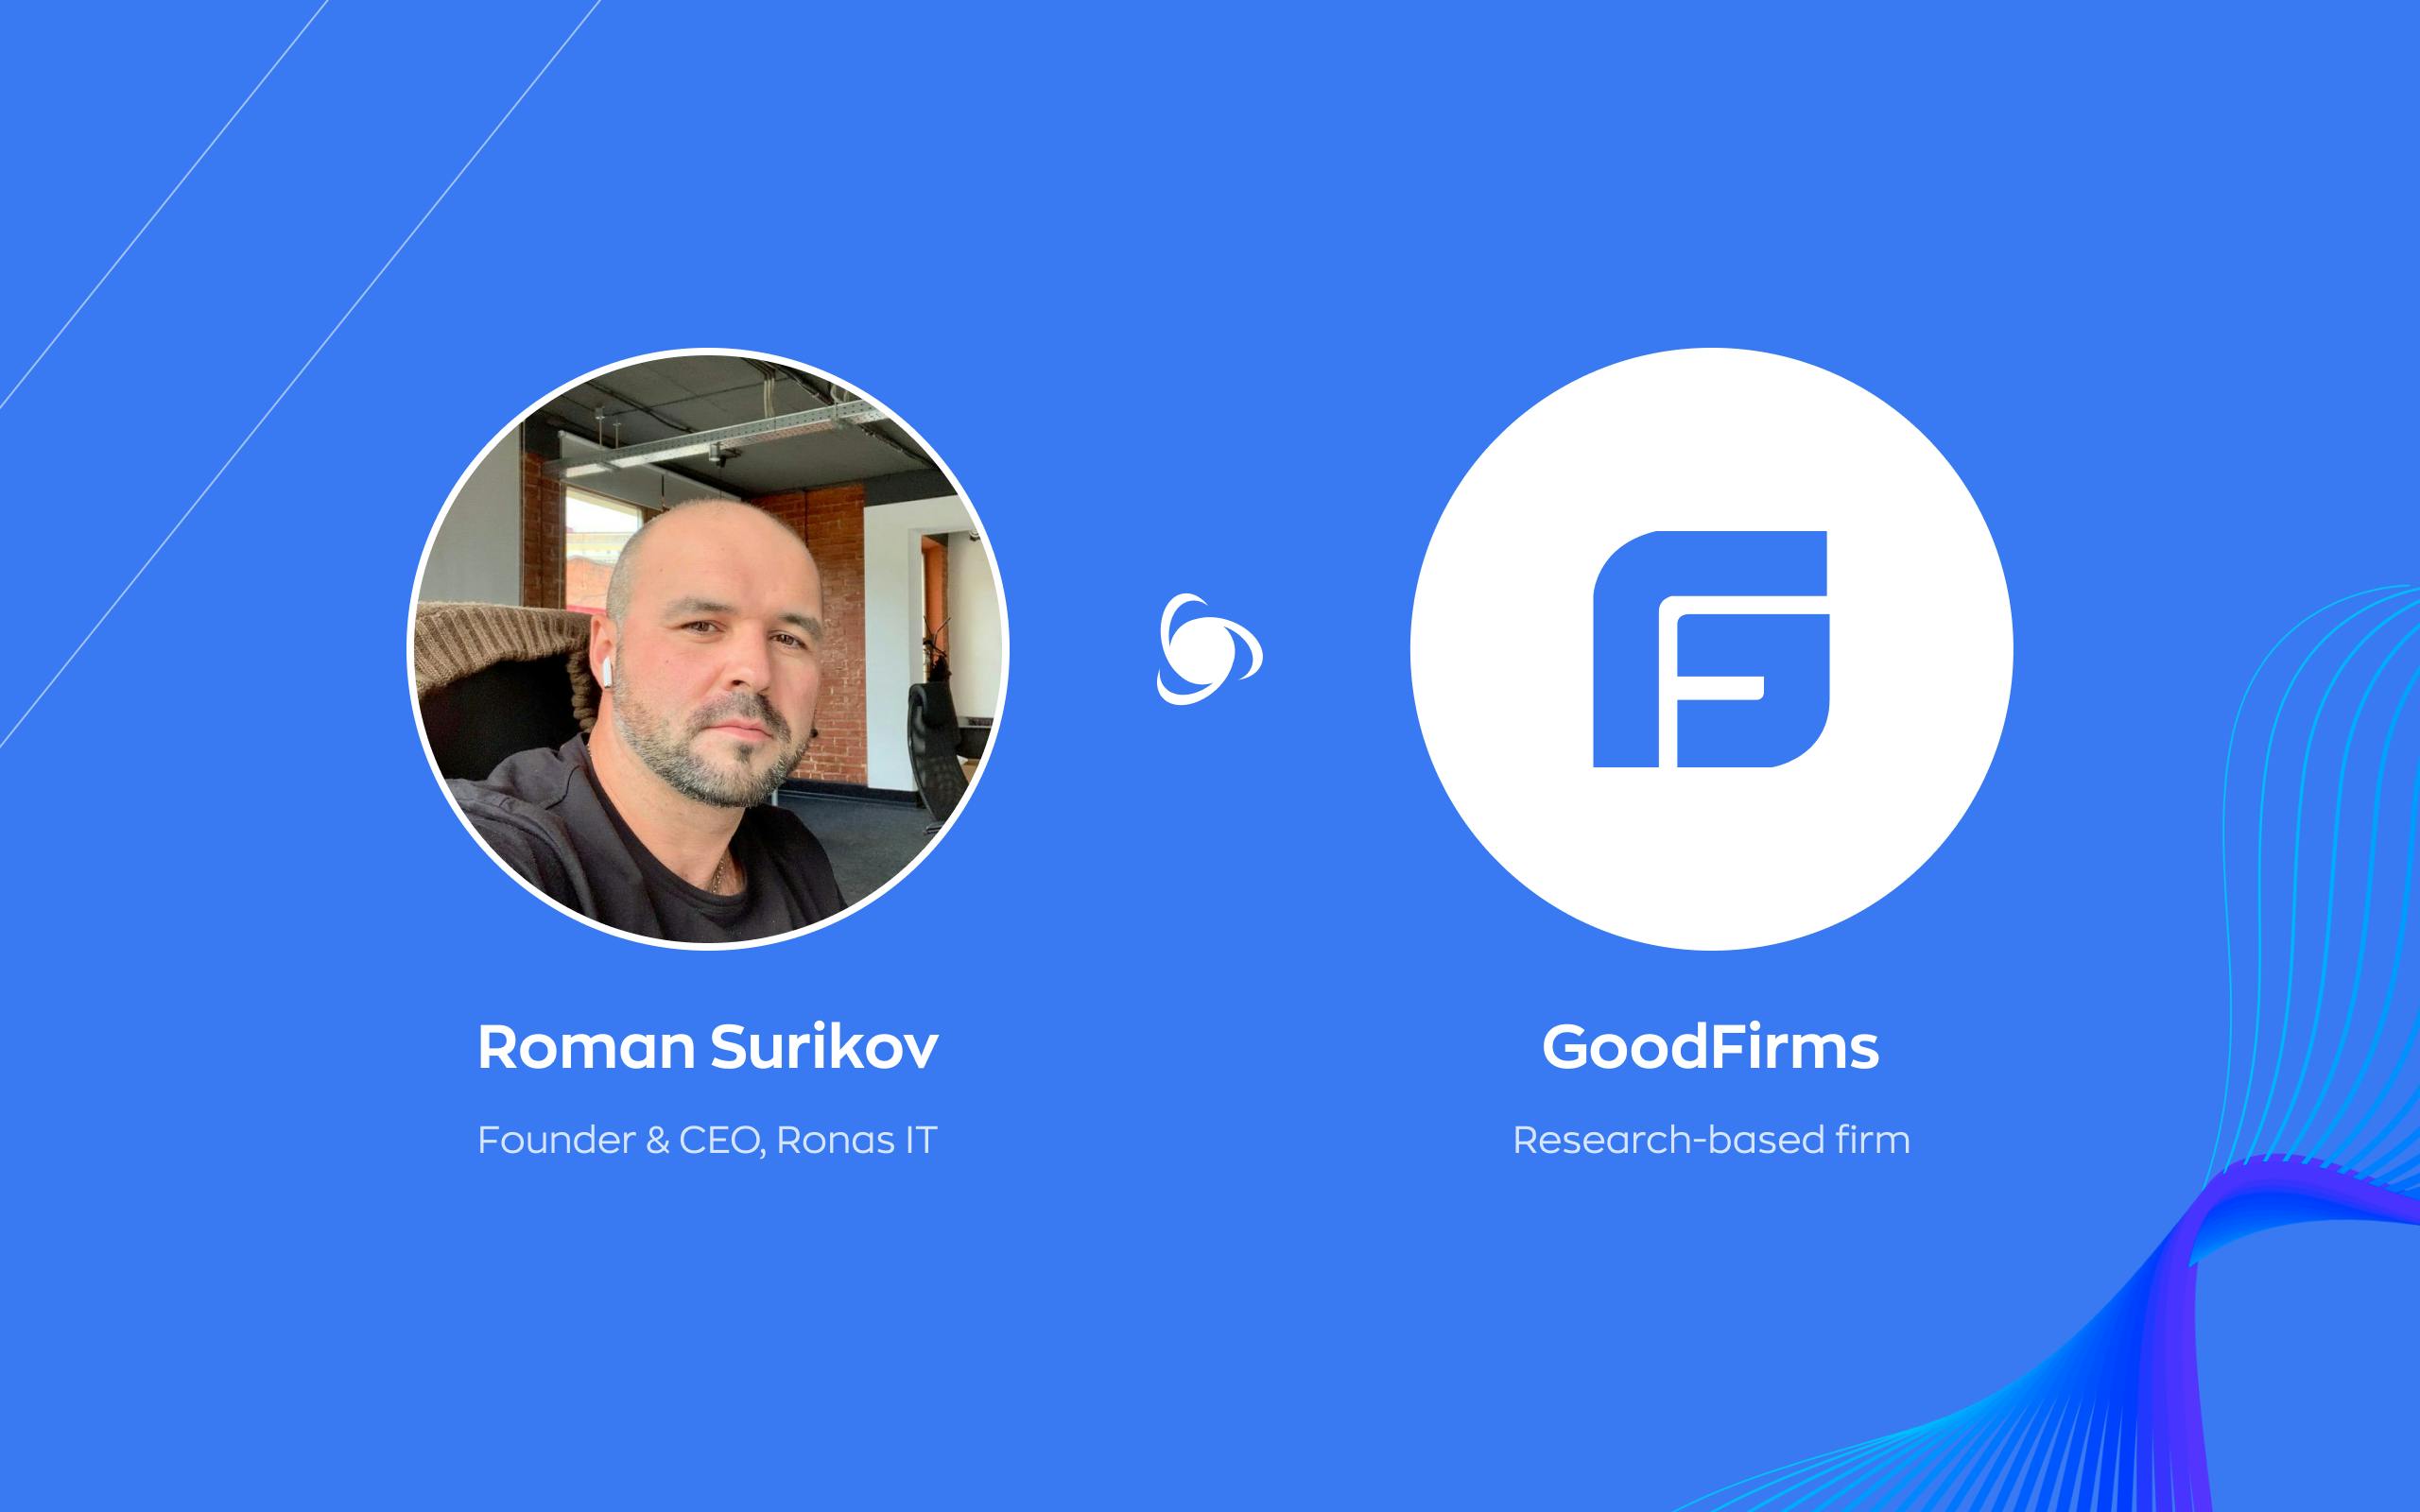 The success story of Roman Surikov, interview made by Goodfirms